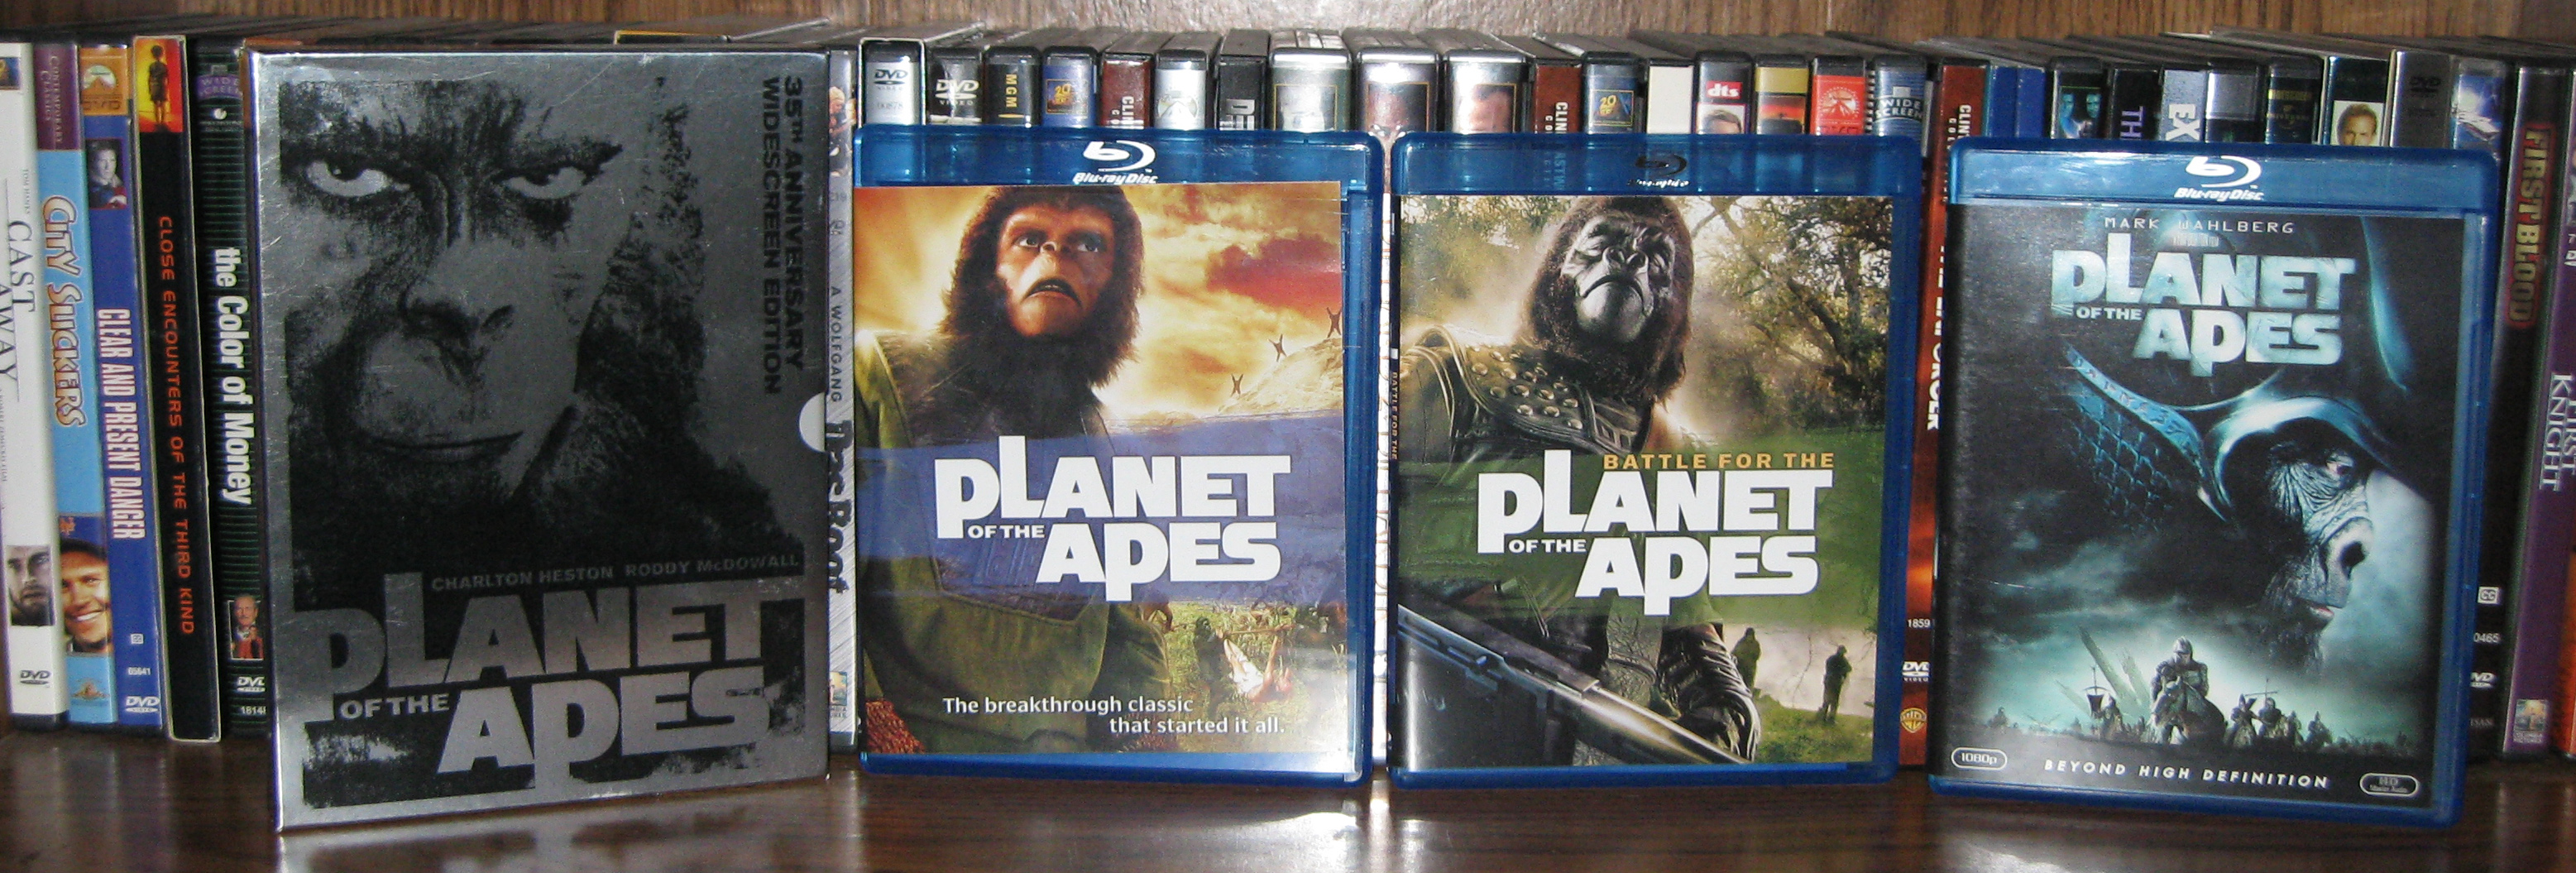 Planet Of The Apes Collection 11_2008.jpg